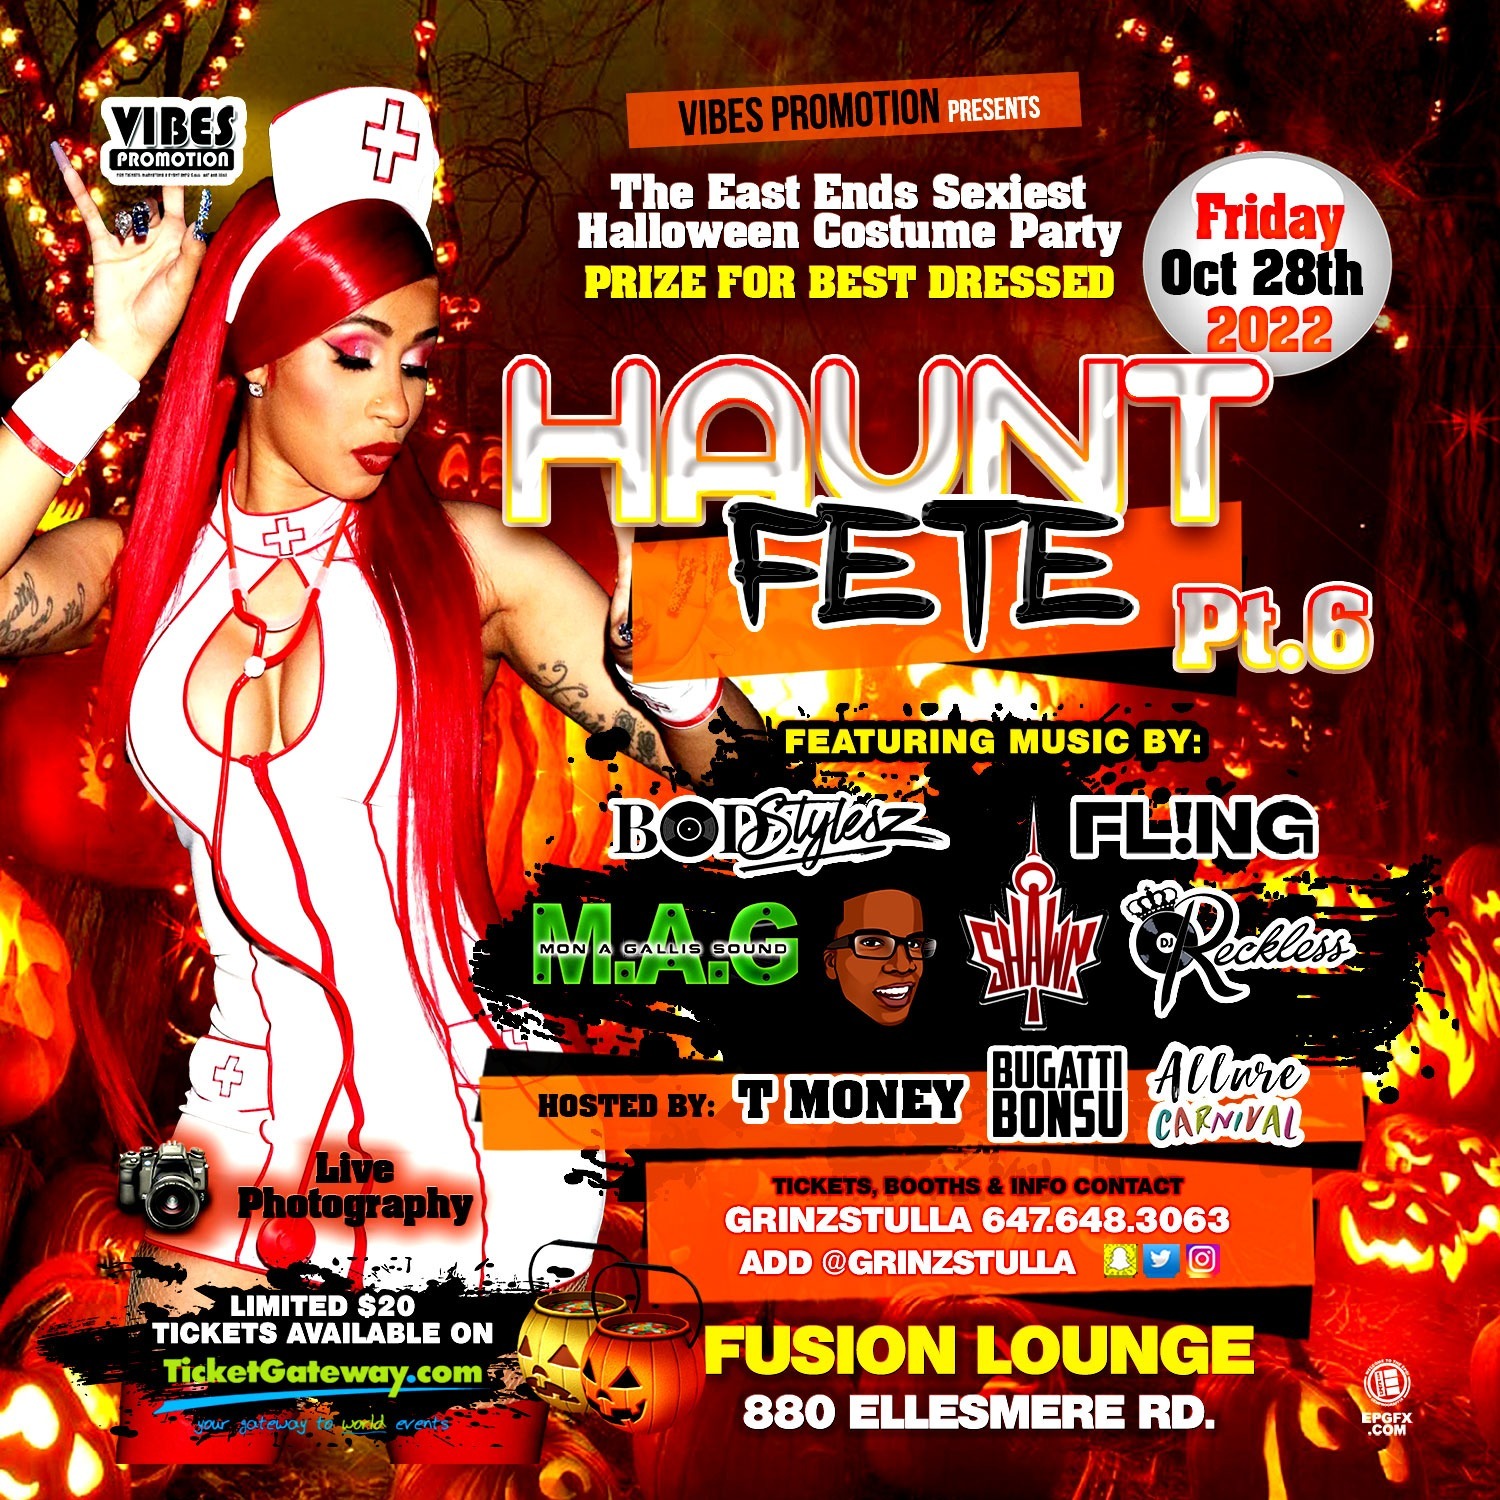 HAUNTE FETE 6.0 SEXIEST HALLOWEEN PARTY IN THE EAST